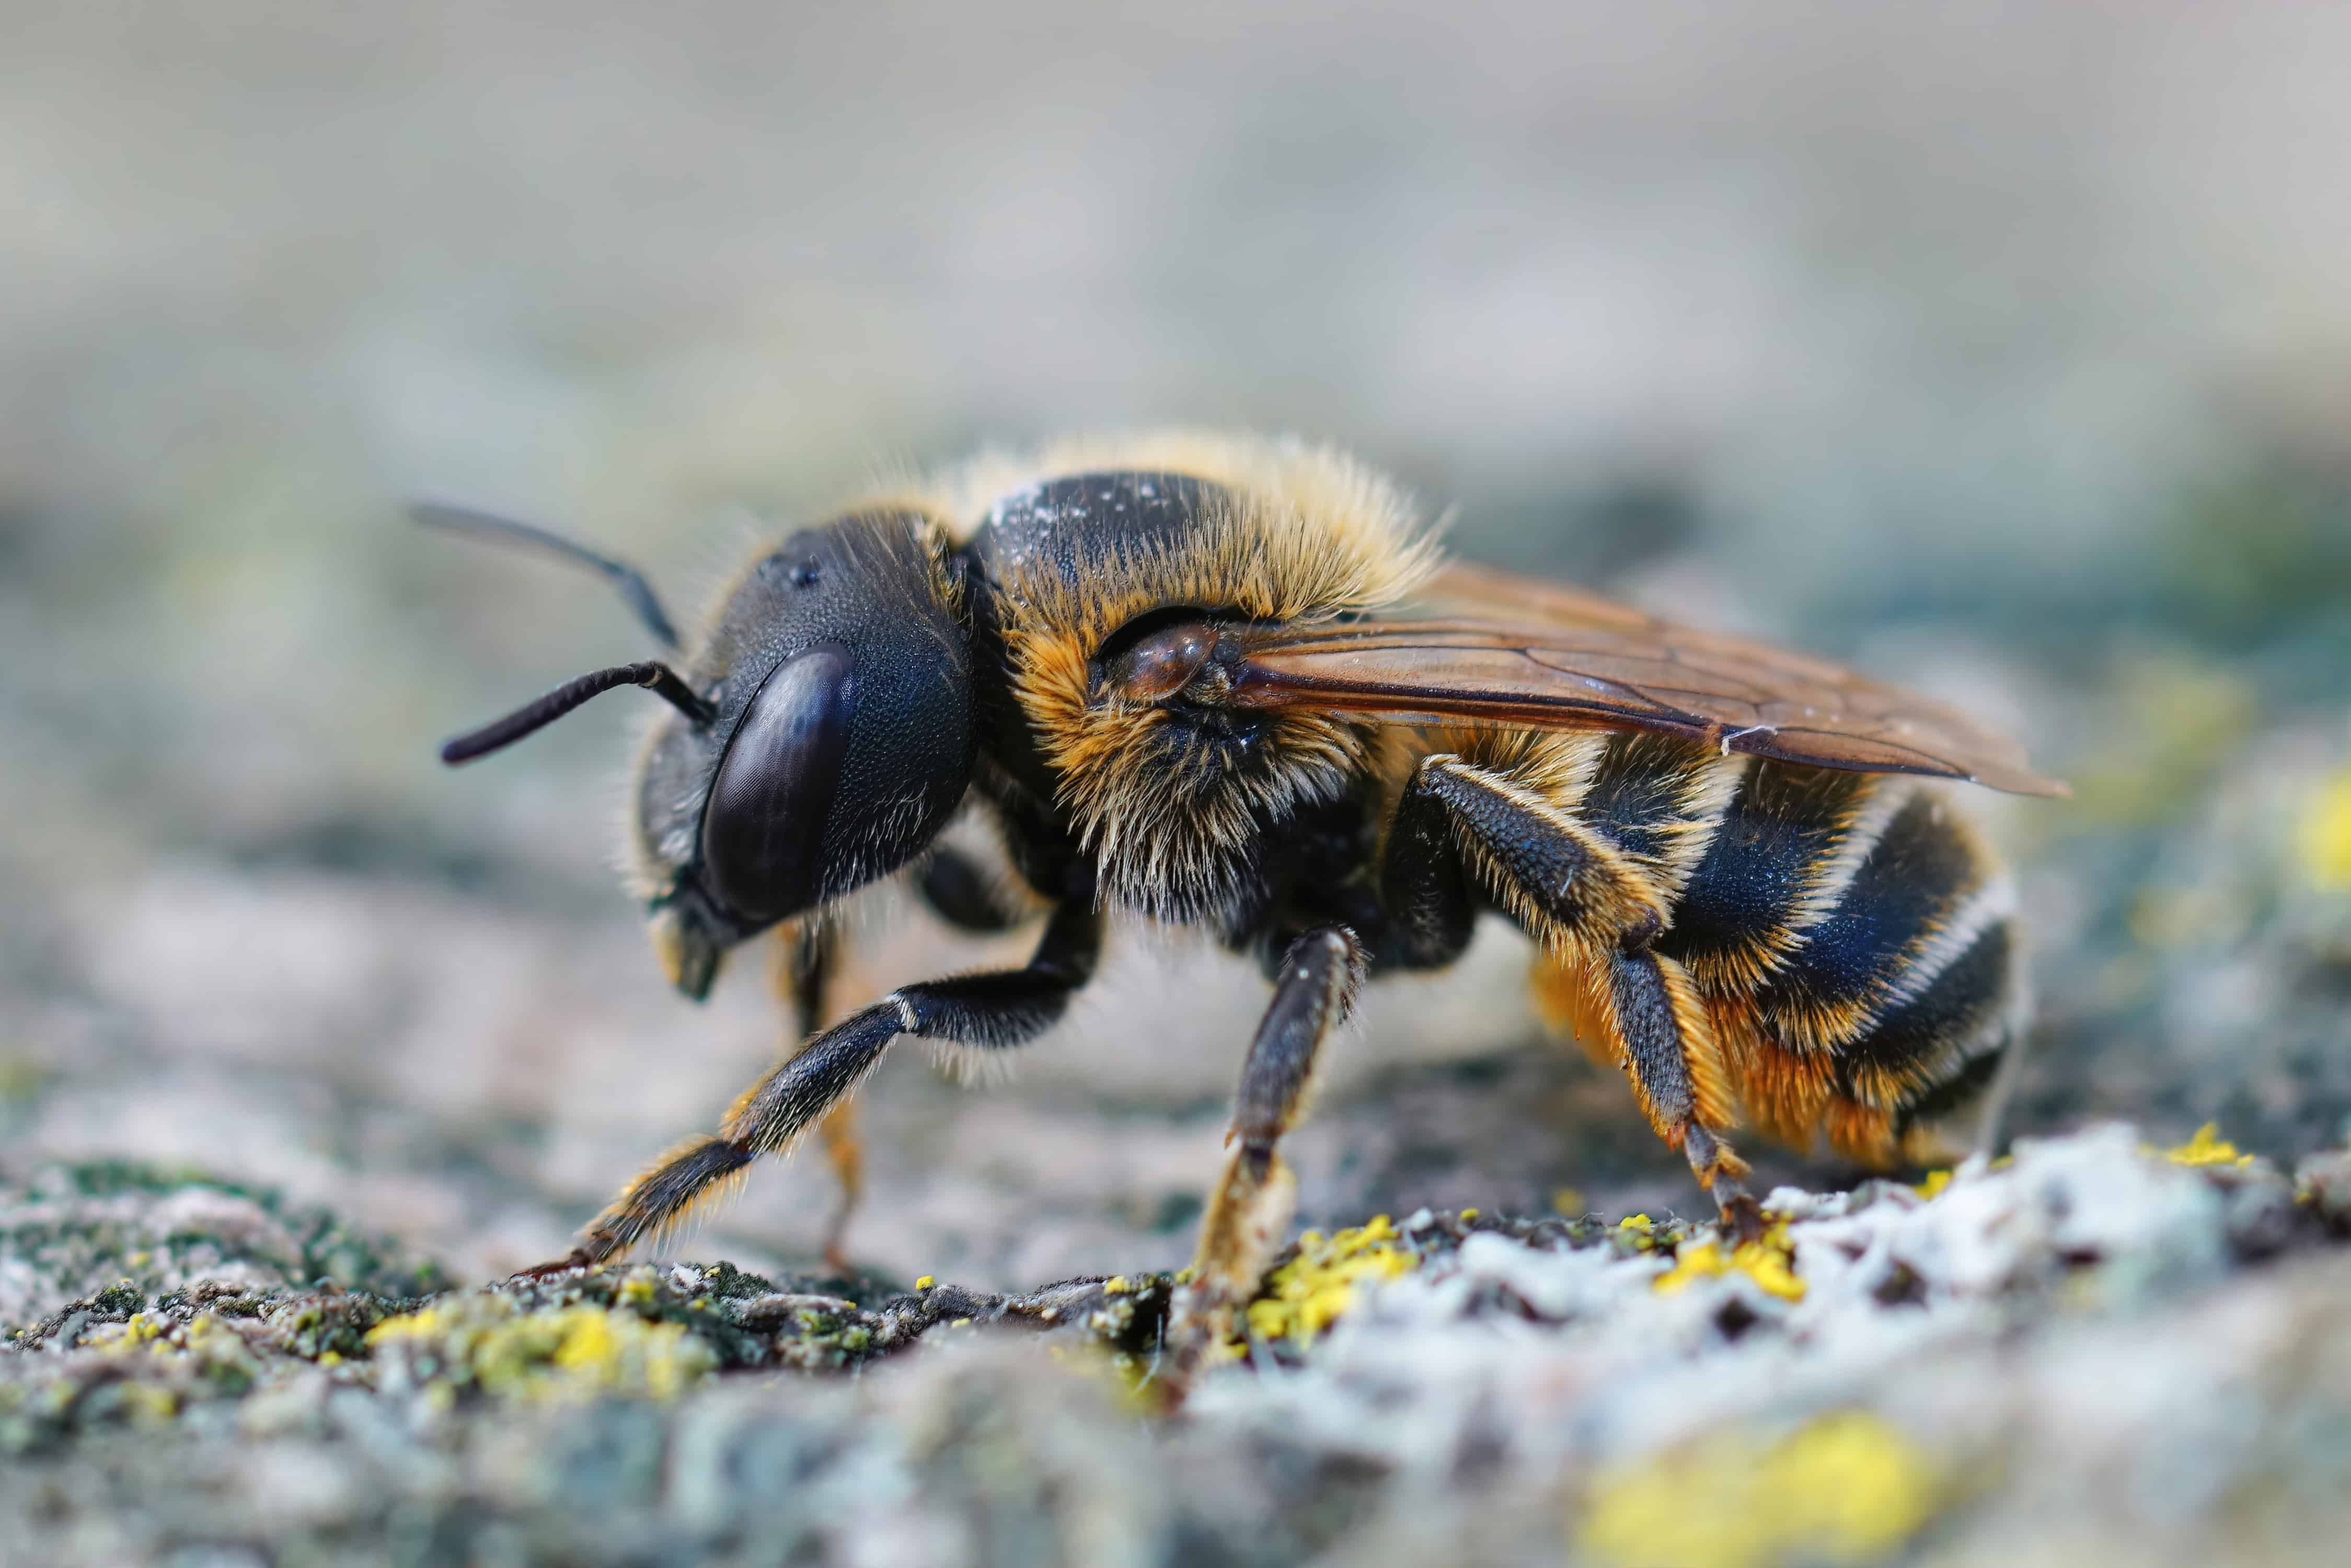 Detailed closeup on a Mediterranean golden haired mason bee, Osmia aurulenta. The bee is facing frame left. The bee had a black face and a black thorax. The thorax jhas a few light hairs on it. The bee's abdomen is banded black with slender gold stripes.